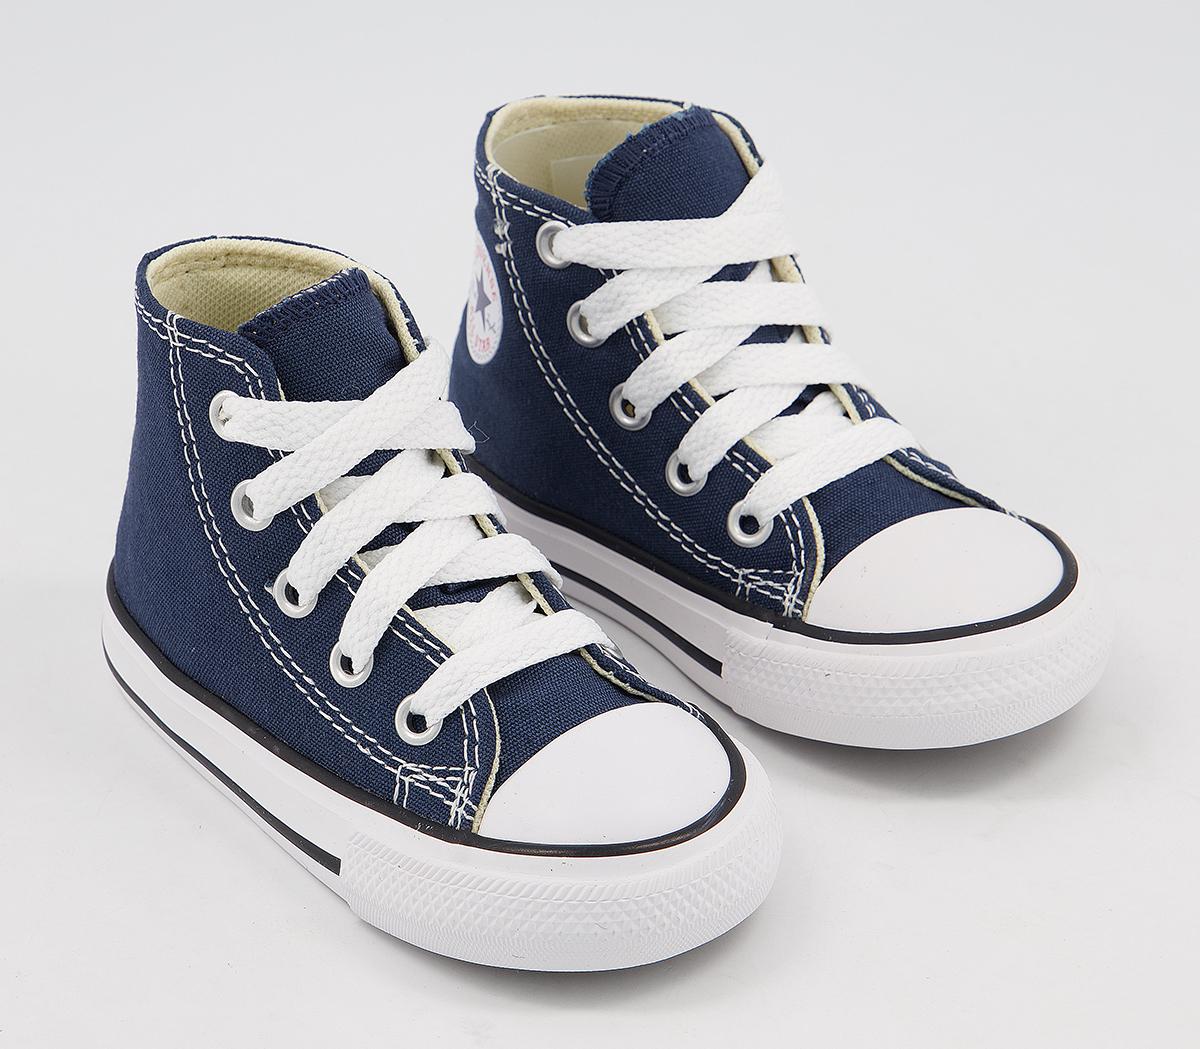 Kids Converse Baby Boys Small Star Hi Canvas In Navy Blue And White, 4 Infant